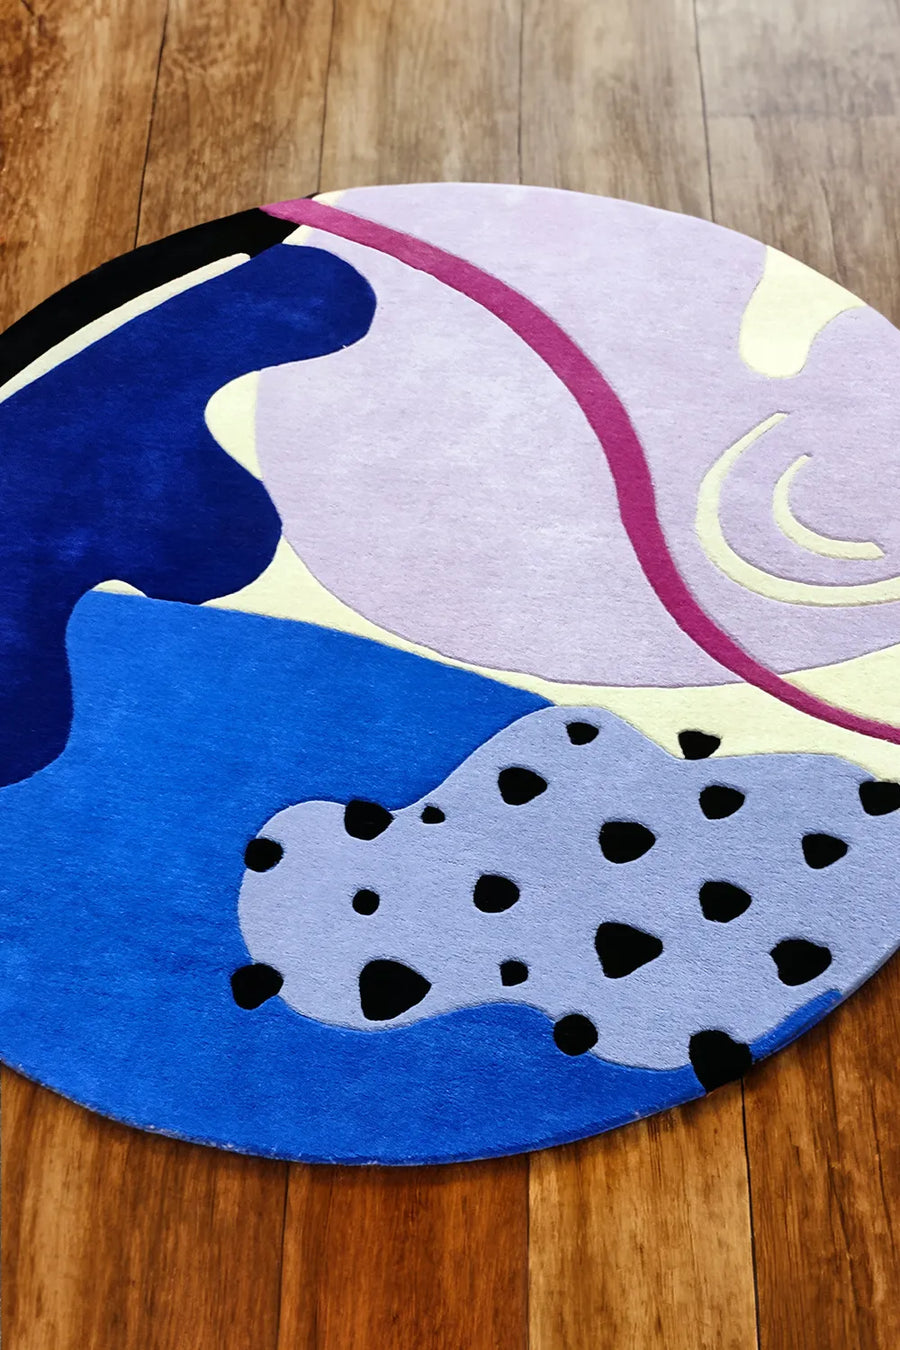 Retro Futuristic: Blue and Purple Round Abstract Hand Tufted Wool Rug